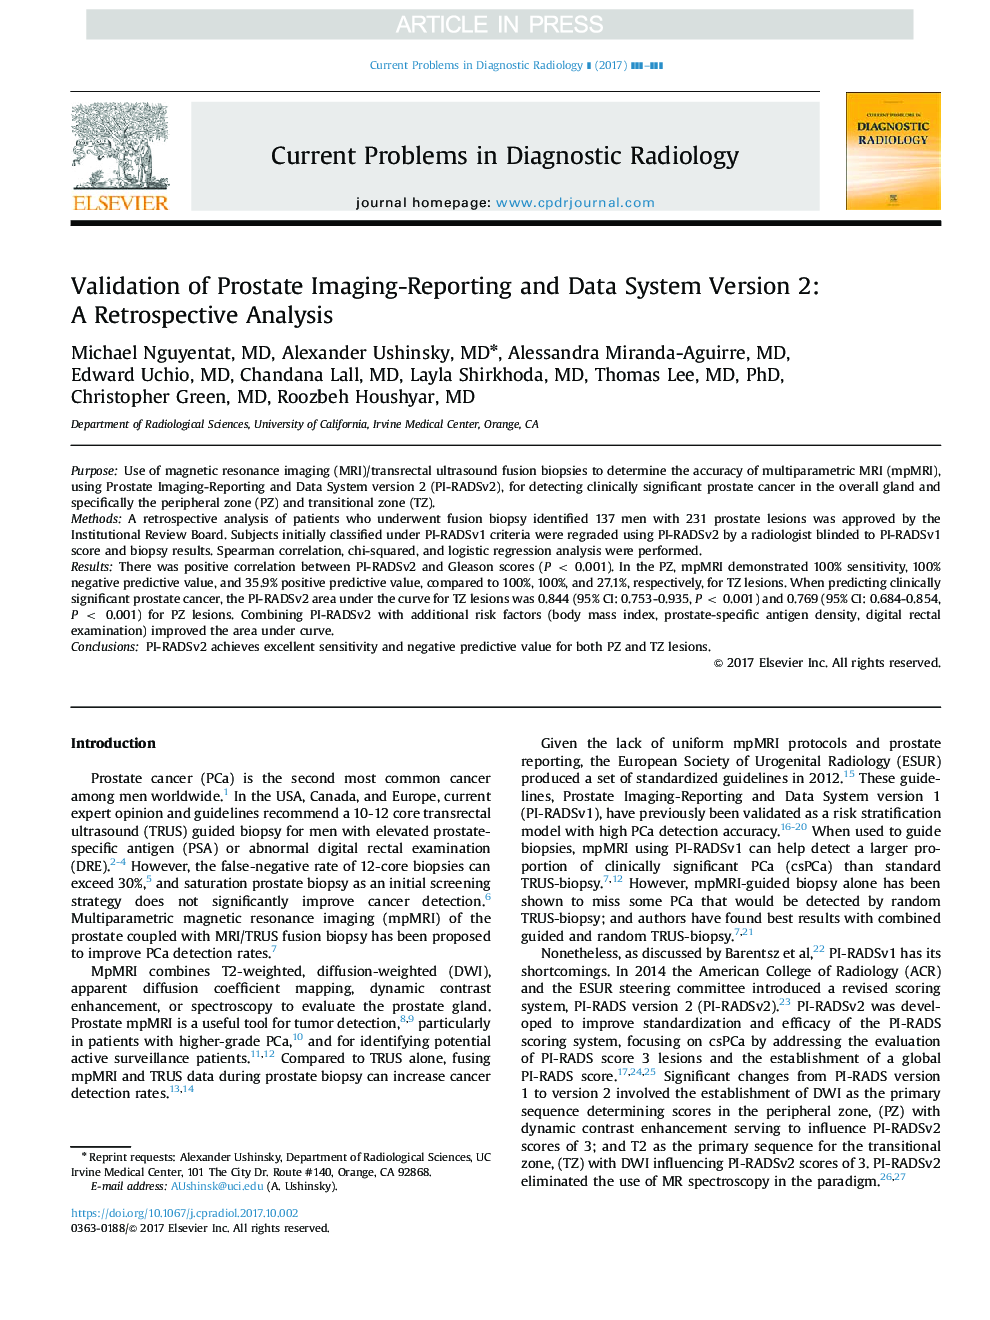 Validation of Prostate Imaging-Reporting and Data System Version 2: A Retrospective Analysis